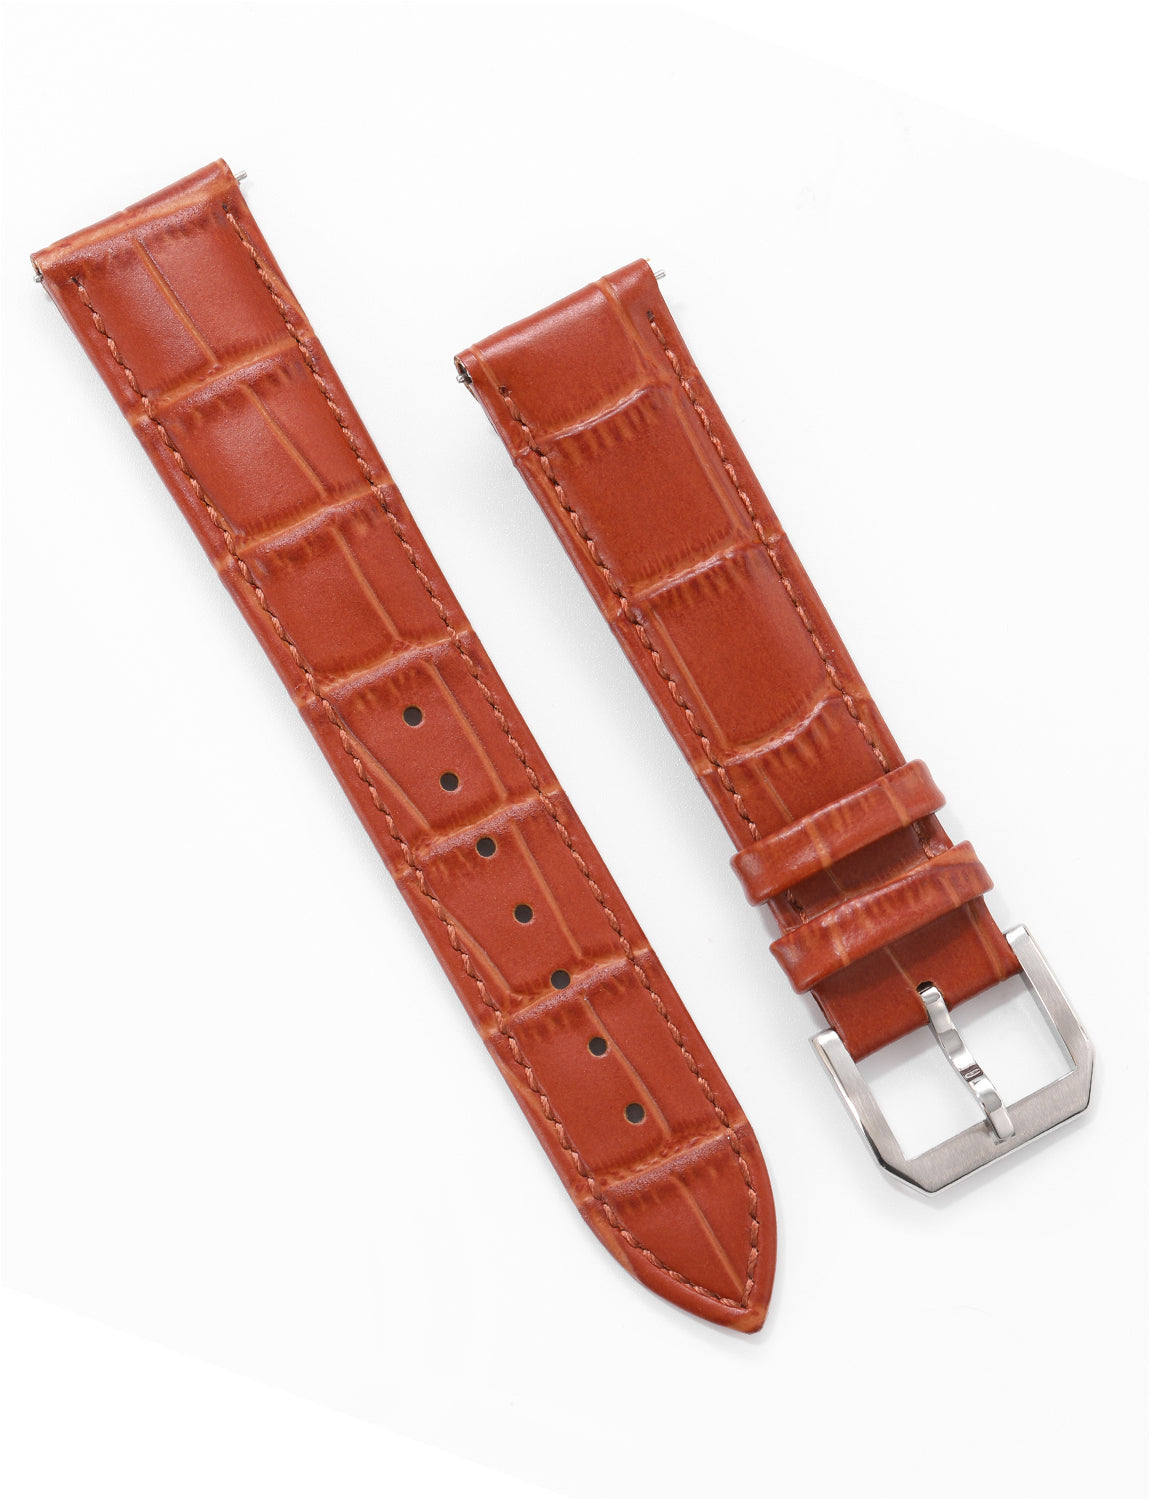 Easy Release Soft Leather Band 20mm